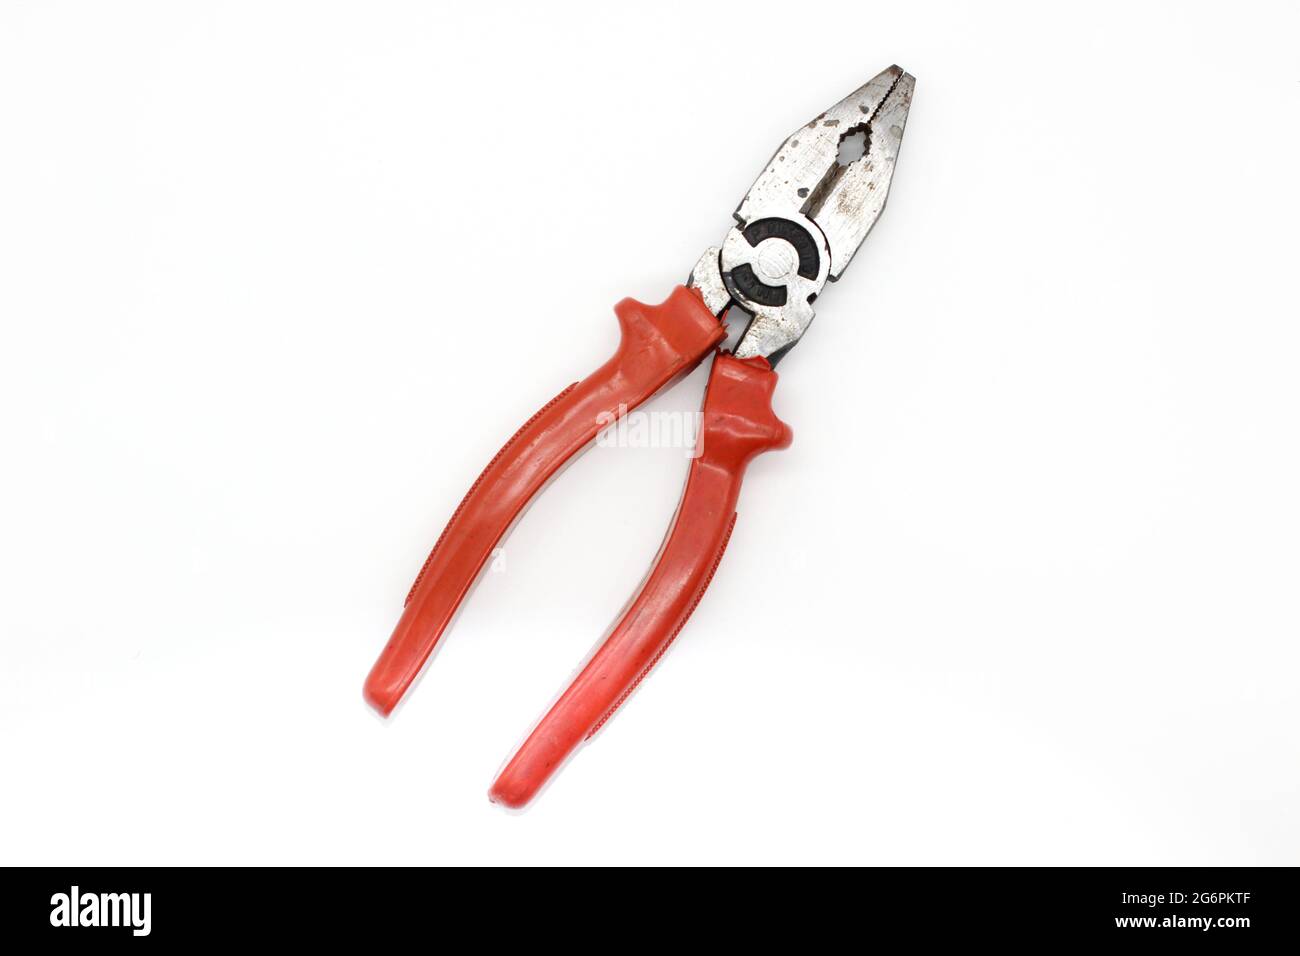 A picture of wire cutter isolated on white background Stock Photo